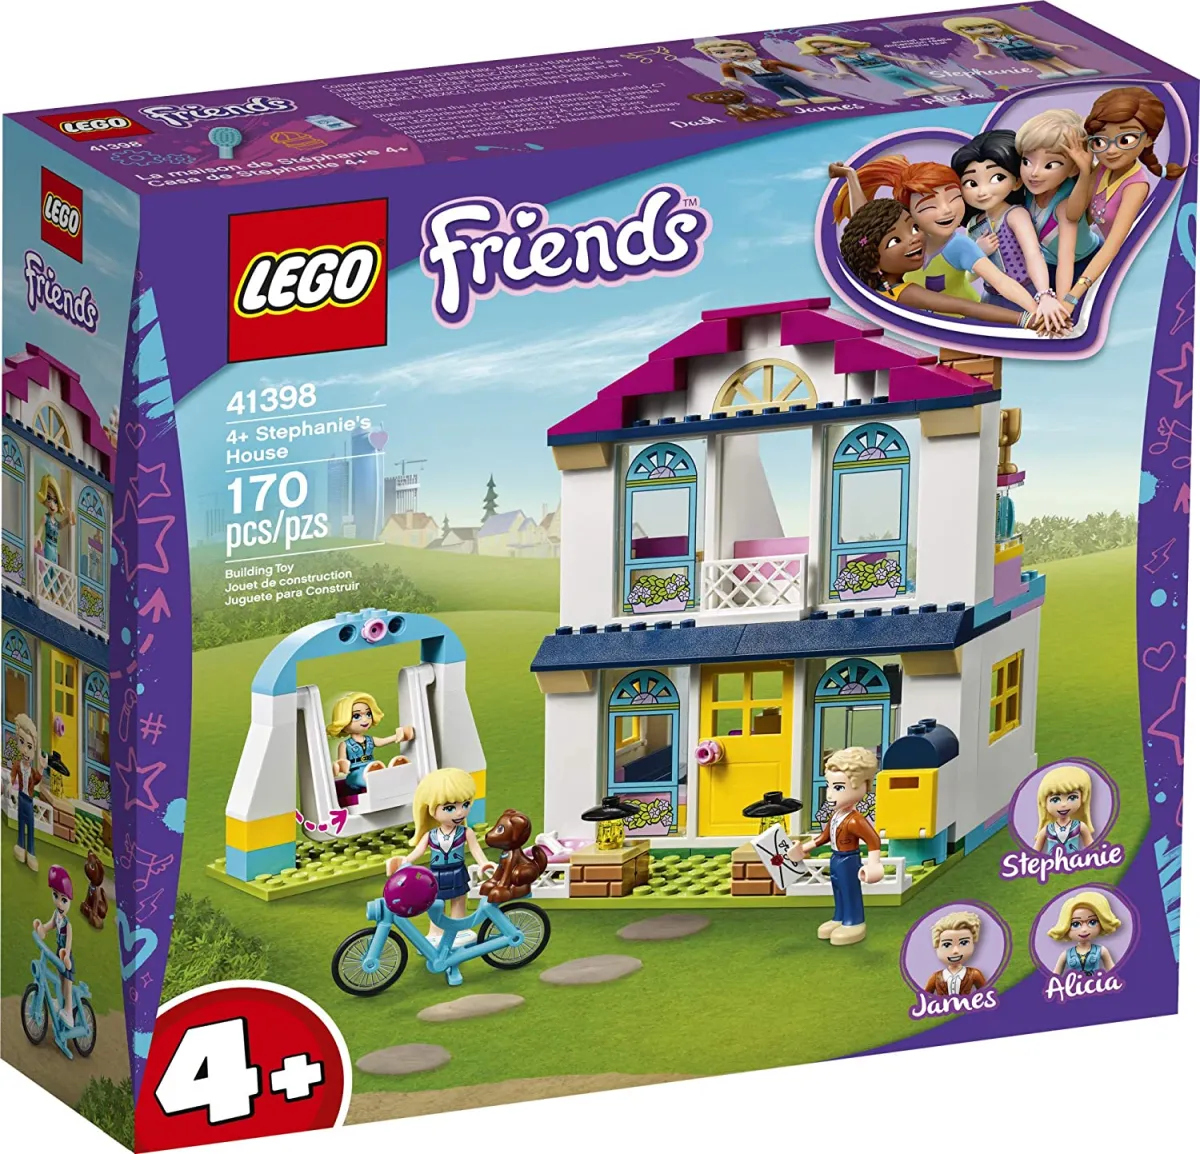 From Denmark】LEGO Friends 4 + House of Stephanie 41398 House of Mini Dolls  Let kids role play family life friends Stephanie, Alicia and James, new  2020 (170 pieces) Guaranteed genuine 